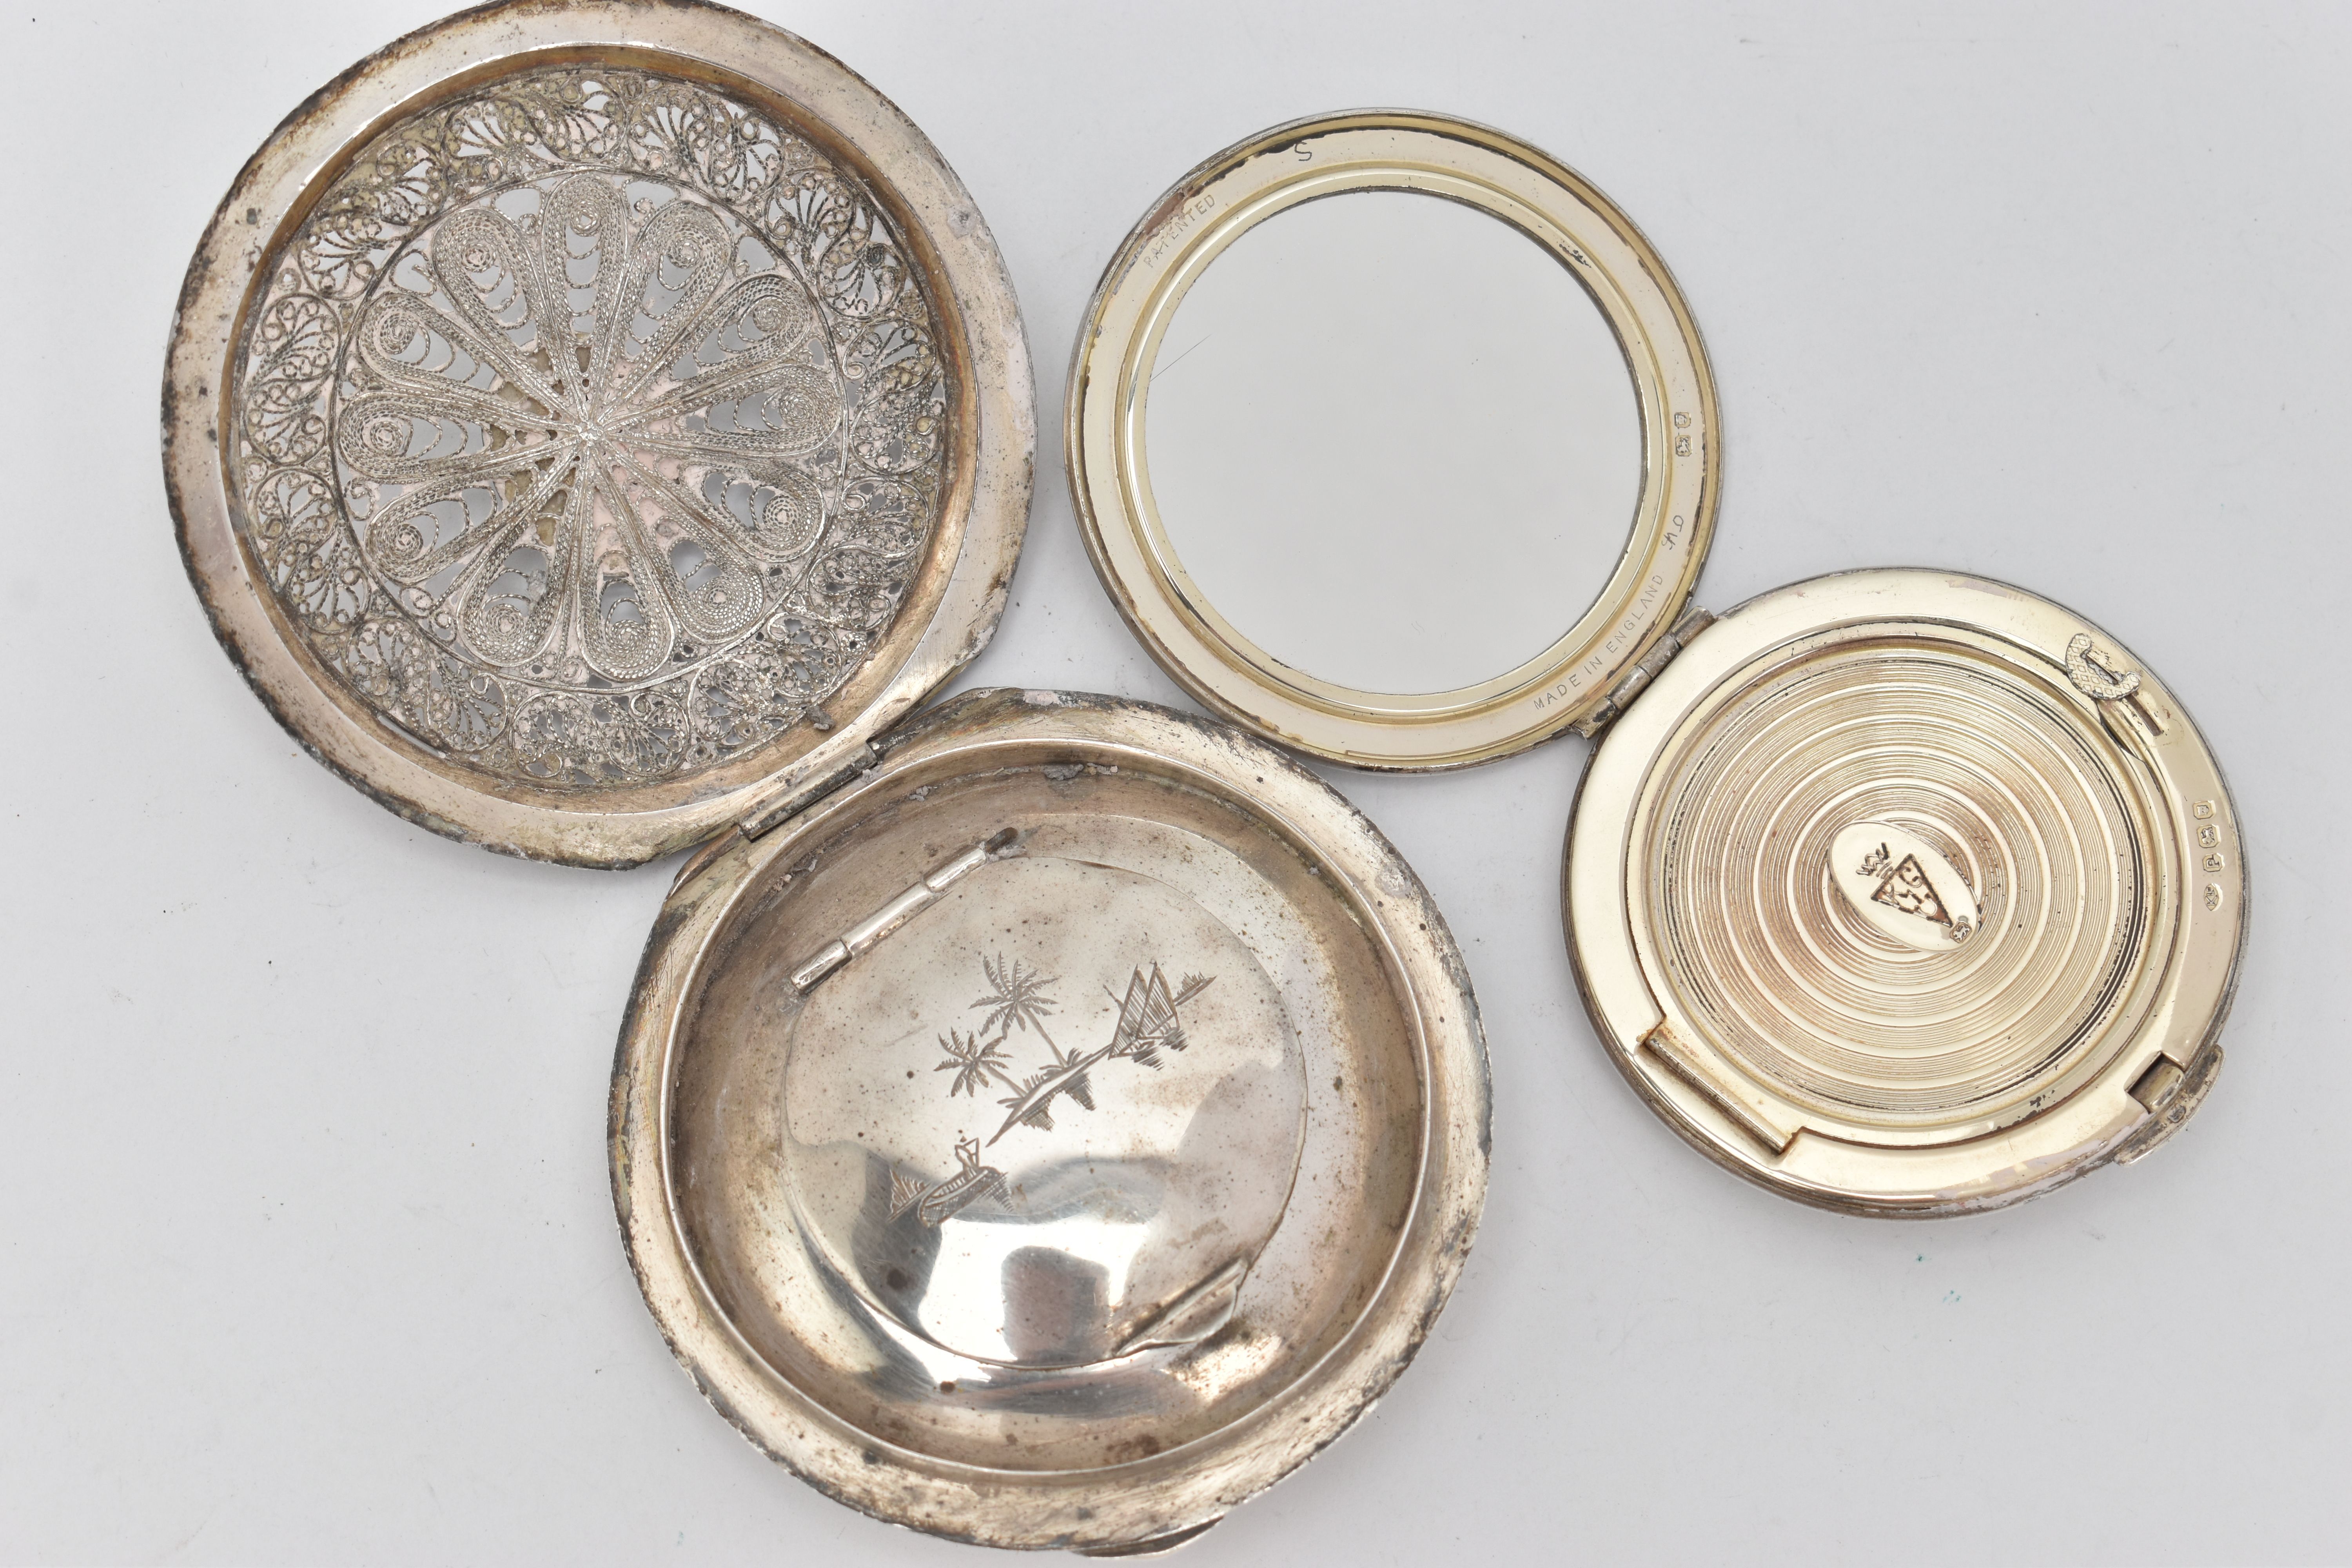 TWO COMPACTS, to include a silver 'Kigu' round polished compact, hallmarked 'Kigu Ltd' Birmingham - Image 3 of 4